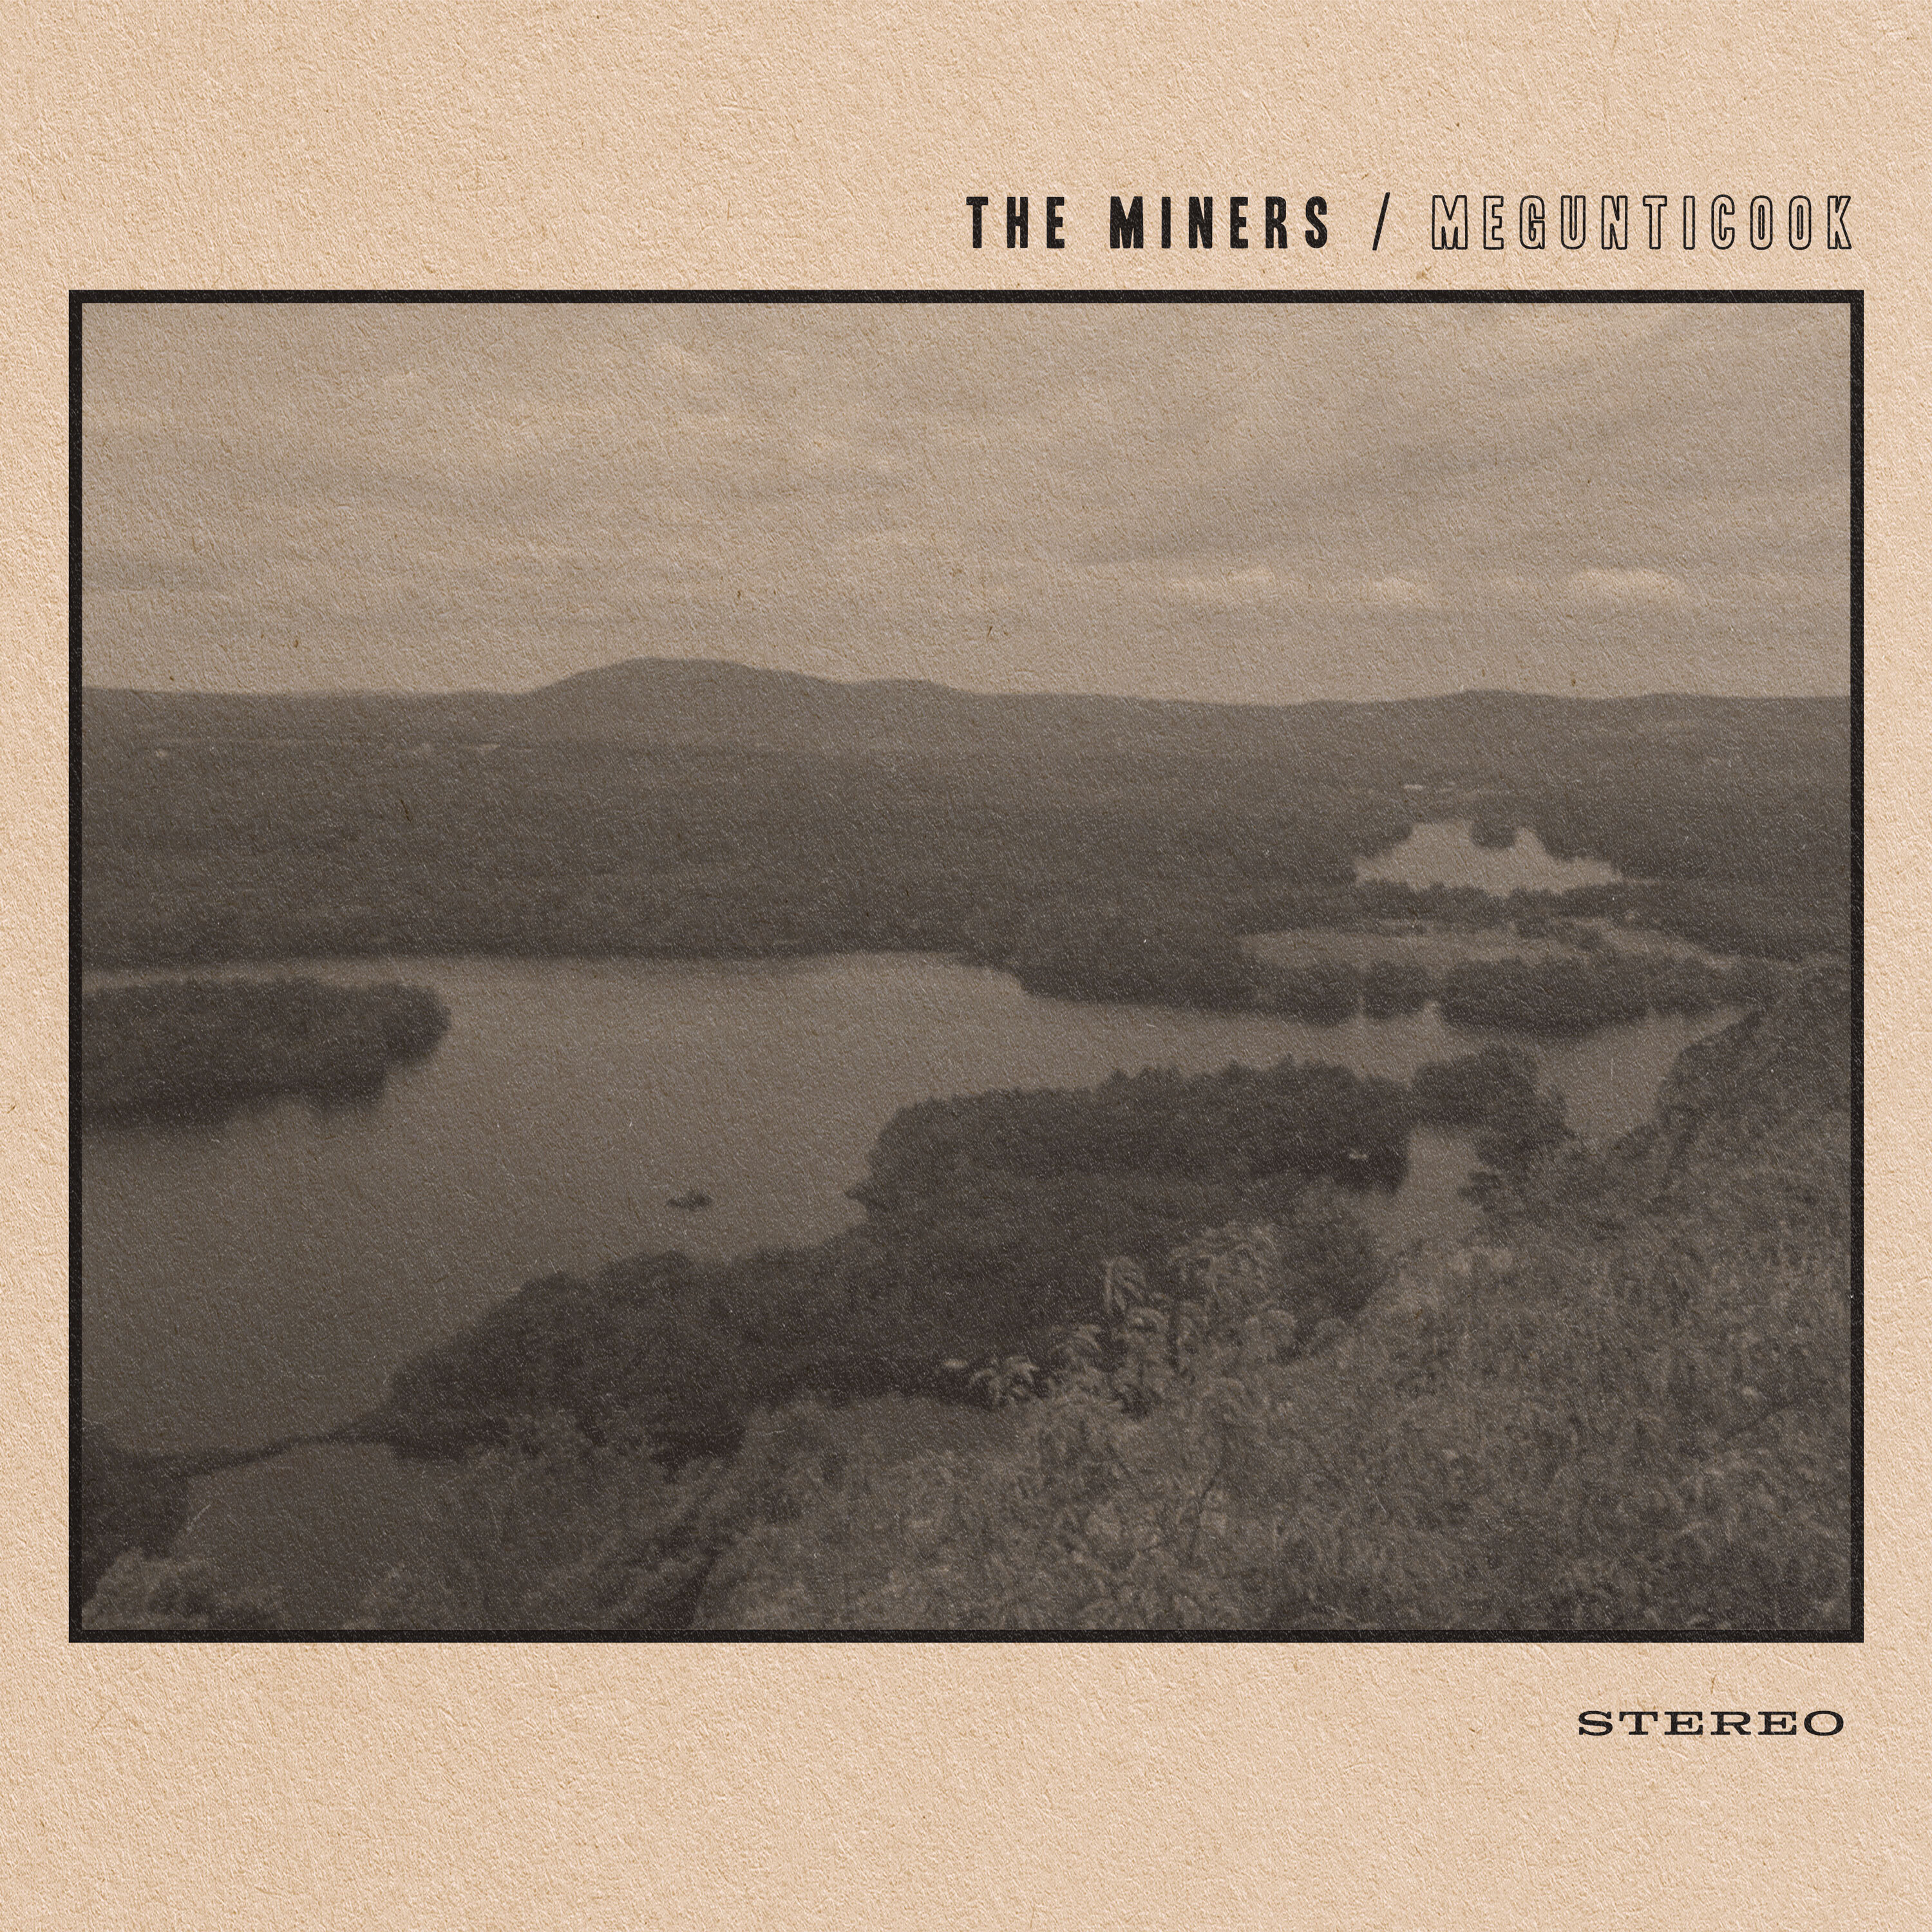 The Miners Release Their Alt-Country "Megunticook" on 10/22